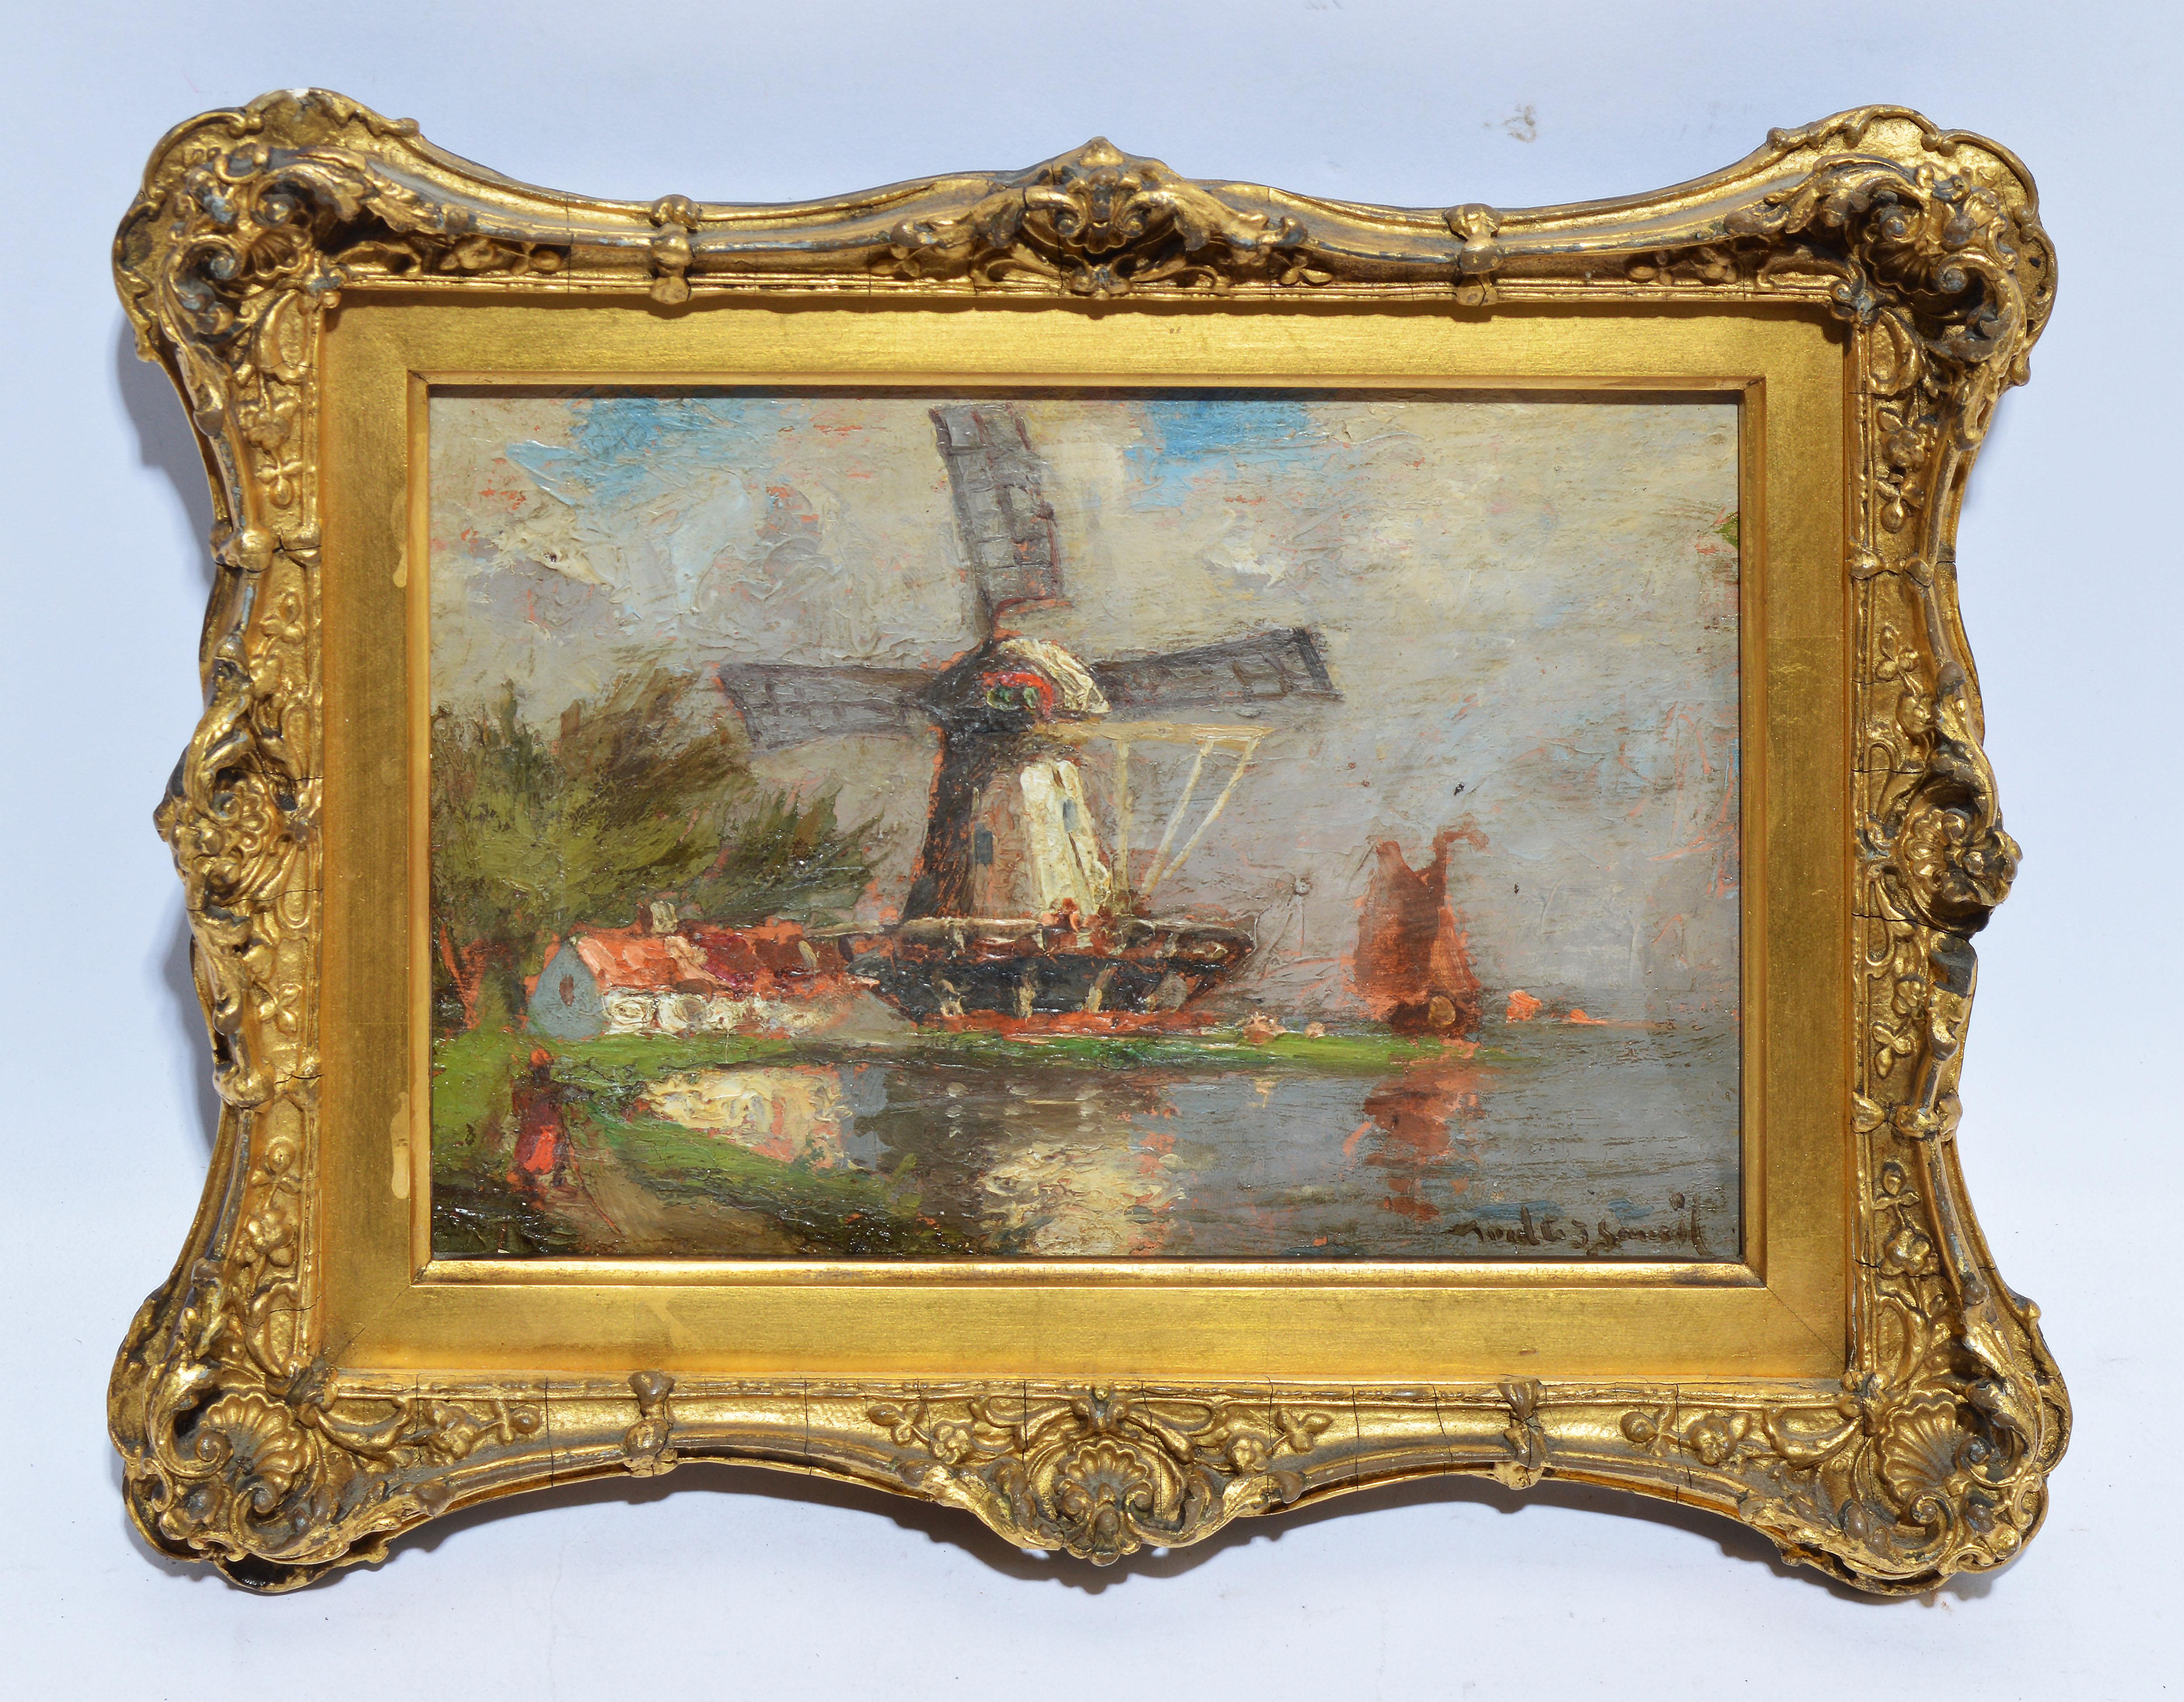 Antique American impressionist painting of a Dutch windmill by Walter Lansil  (1846 - 1925).  Oil on board, circa 1890.  Signed and located on verso.  Displayed in a giltwood frame.  Image, 8